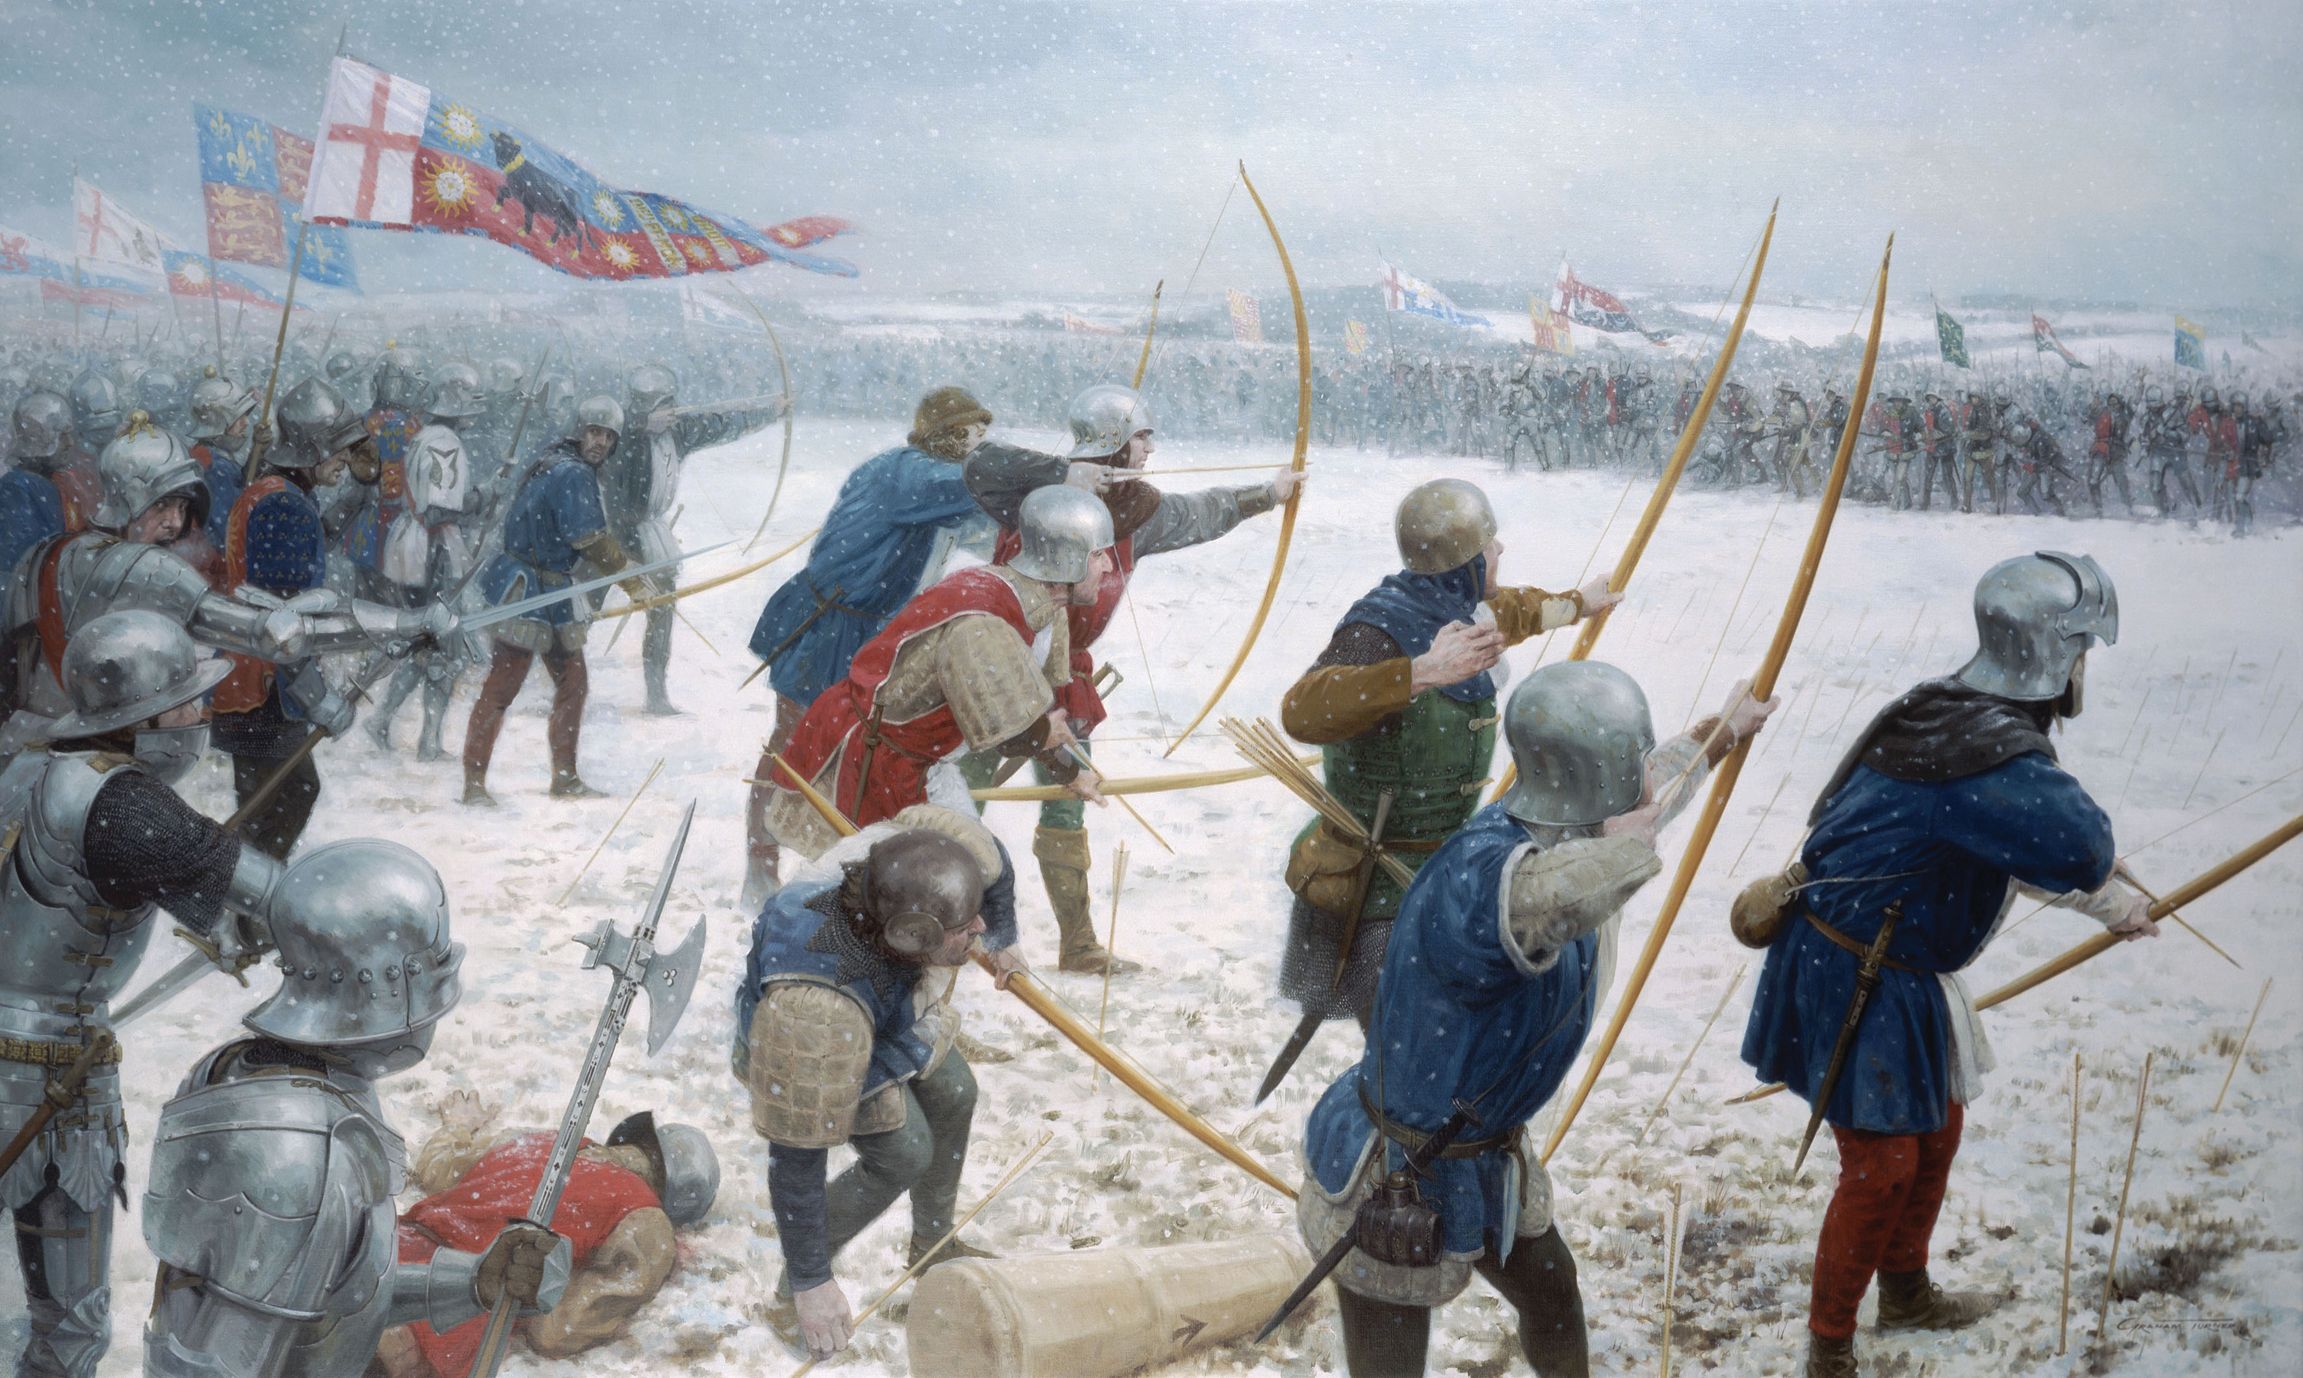 Obscured by the snow, Yorkist archers fire their last deadly volley into the advancing Lancastrian army at Towton. On their left, Edward and his dismounted knights stand ready to fight. Painting by Graham Turner.